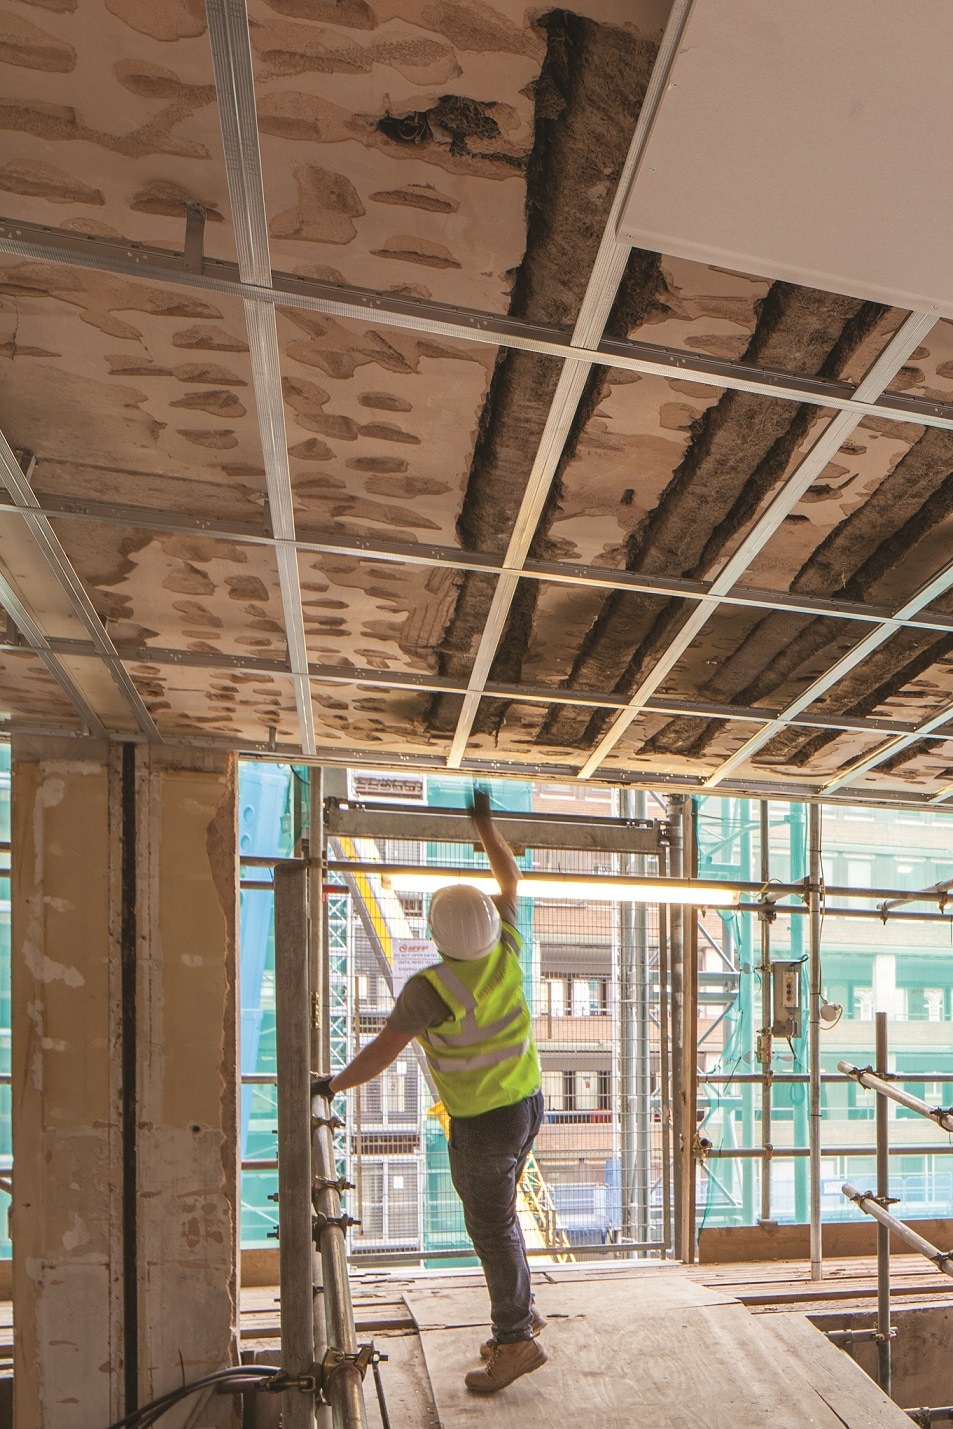 Suspended ceiling system helps reduce installation time